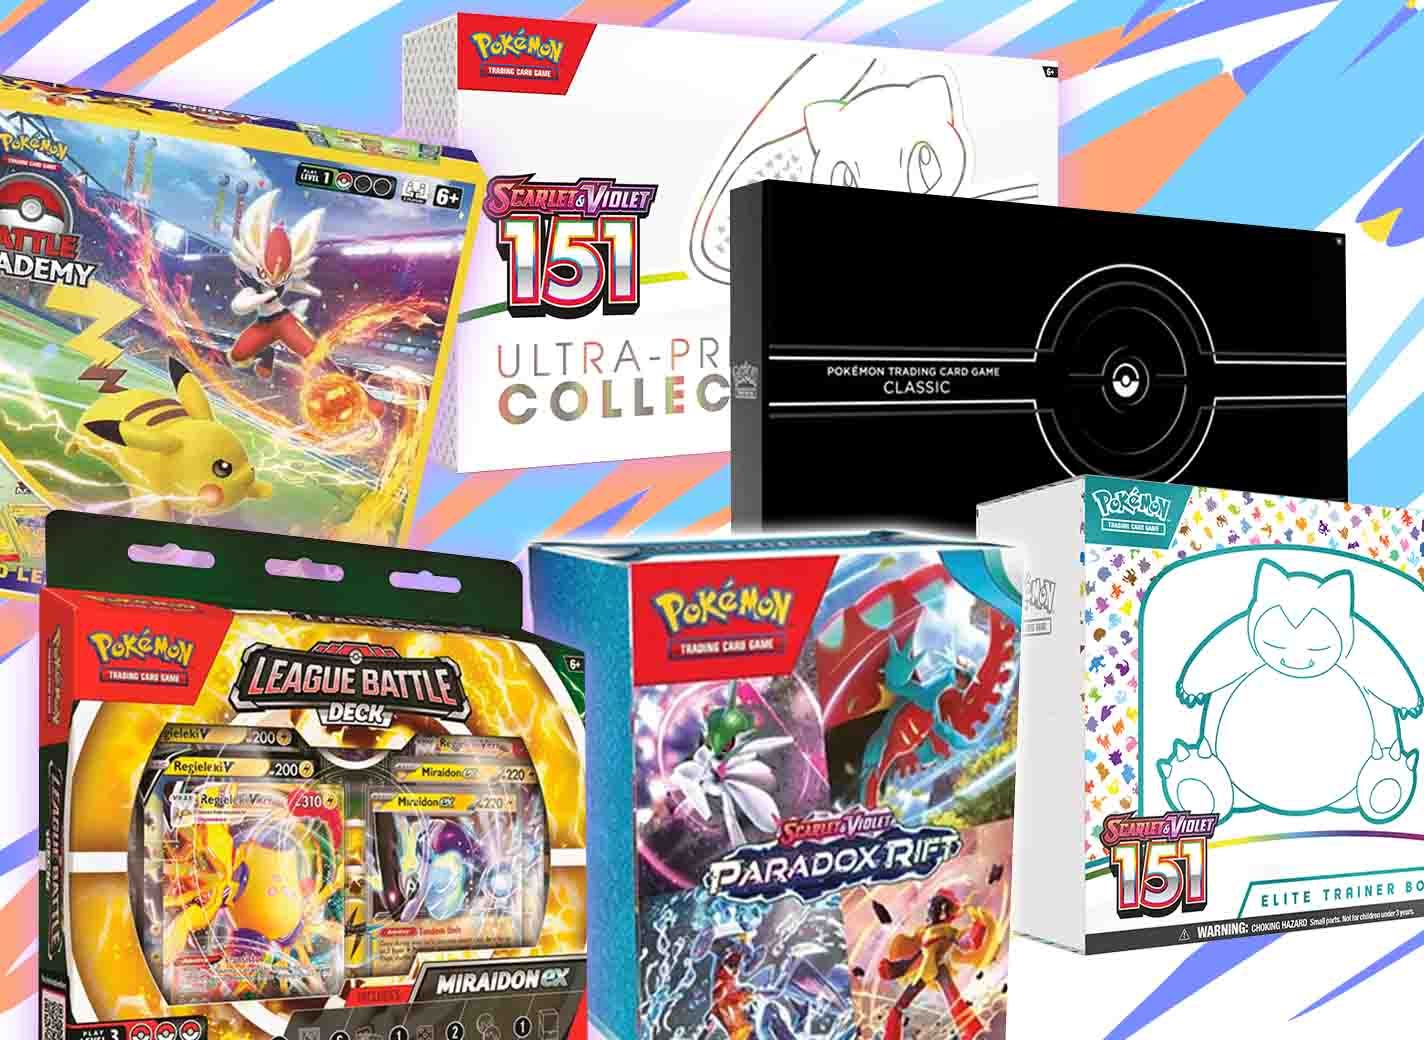 TCGplayer - Buy Pokémon TCG Cards, Singles, and Pack